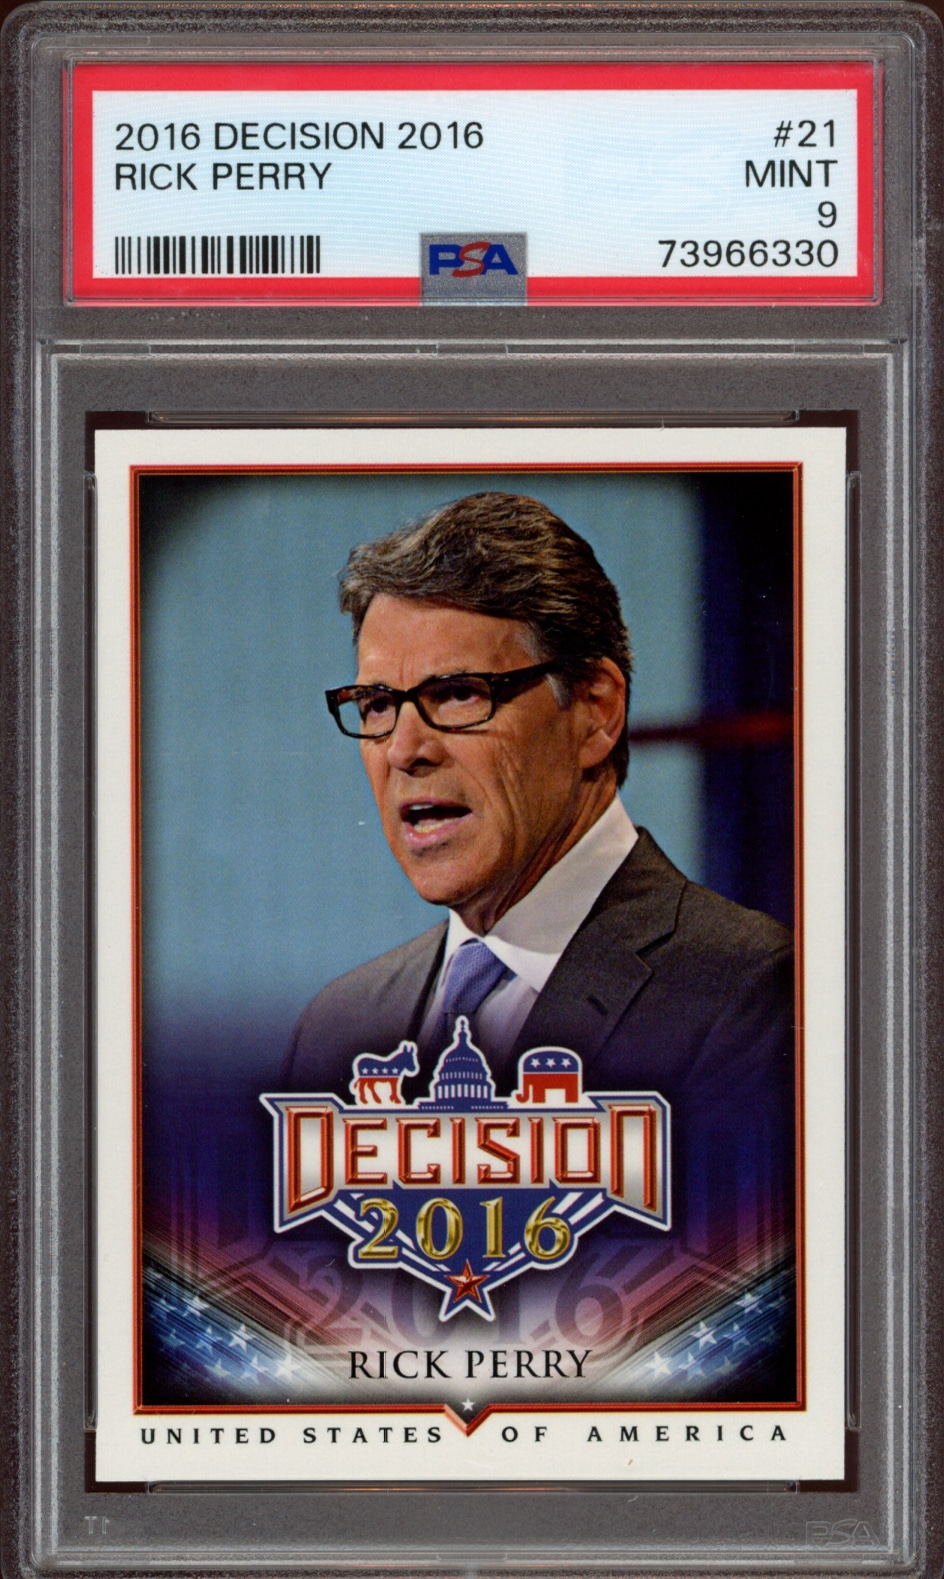 PSA 9 graded 2016 Decision trading card featuring Rick Perry in a vibrant American flag motif.